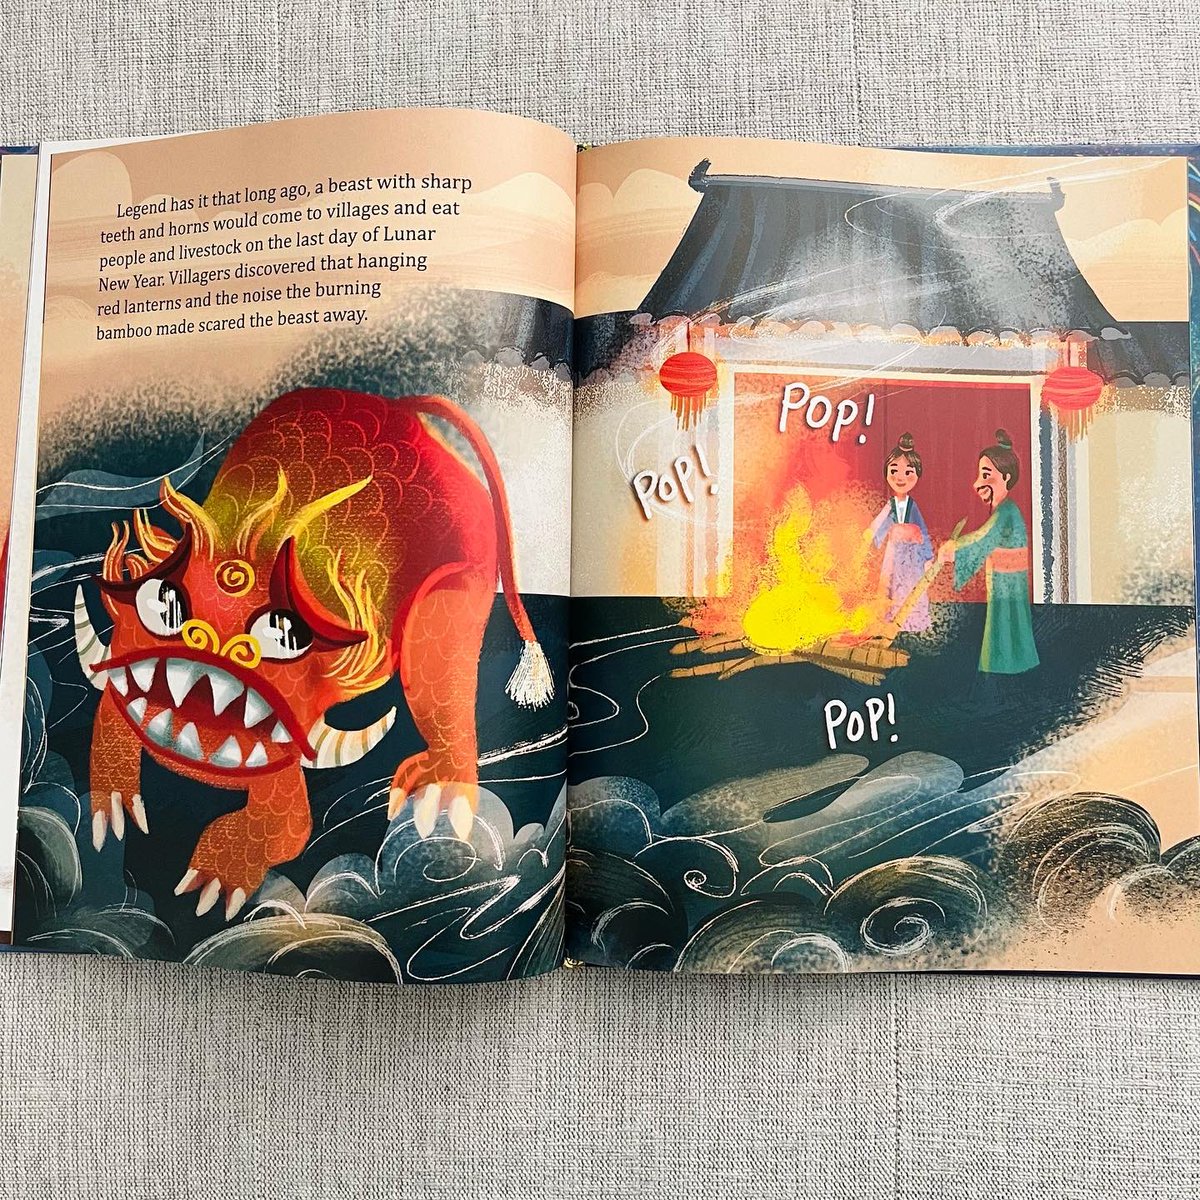 Happy book bday to LUNAR NEW YEAR by Mary Man-Kong/illustrated by me! 🥳 🏮 . It has been so special to illustrate a Golden Book about my culture ❤️ Thank you to Andrea Posner-Sanchez & Roberta Ludlow at @randomhousekids & my amazing agent @Jemiscoe! . michellejingchan.com/lunar-new-year